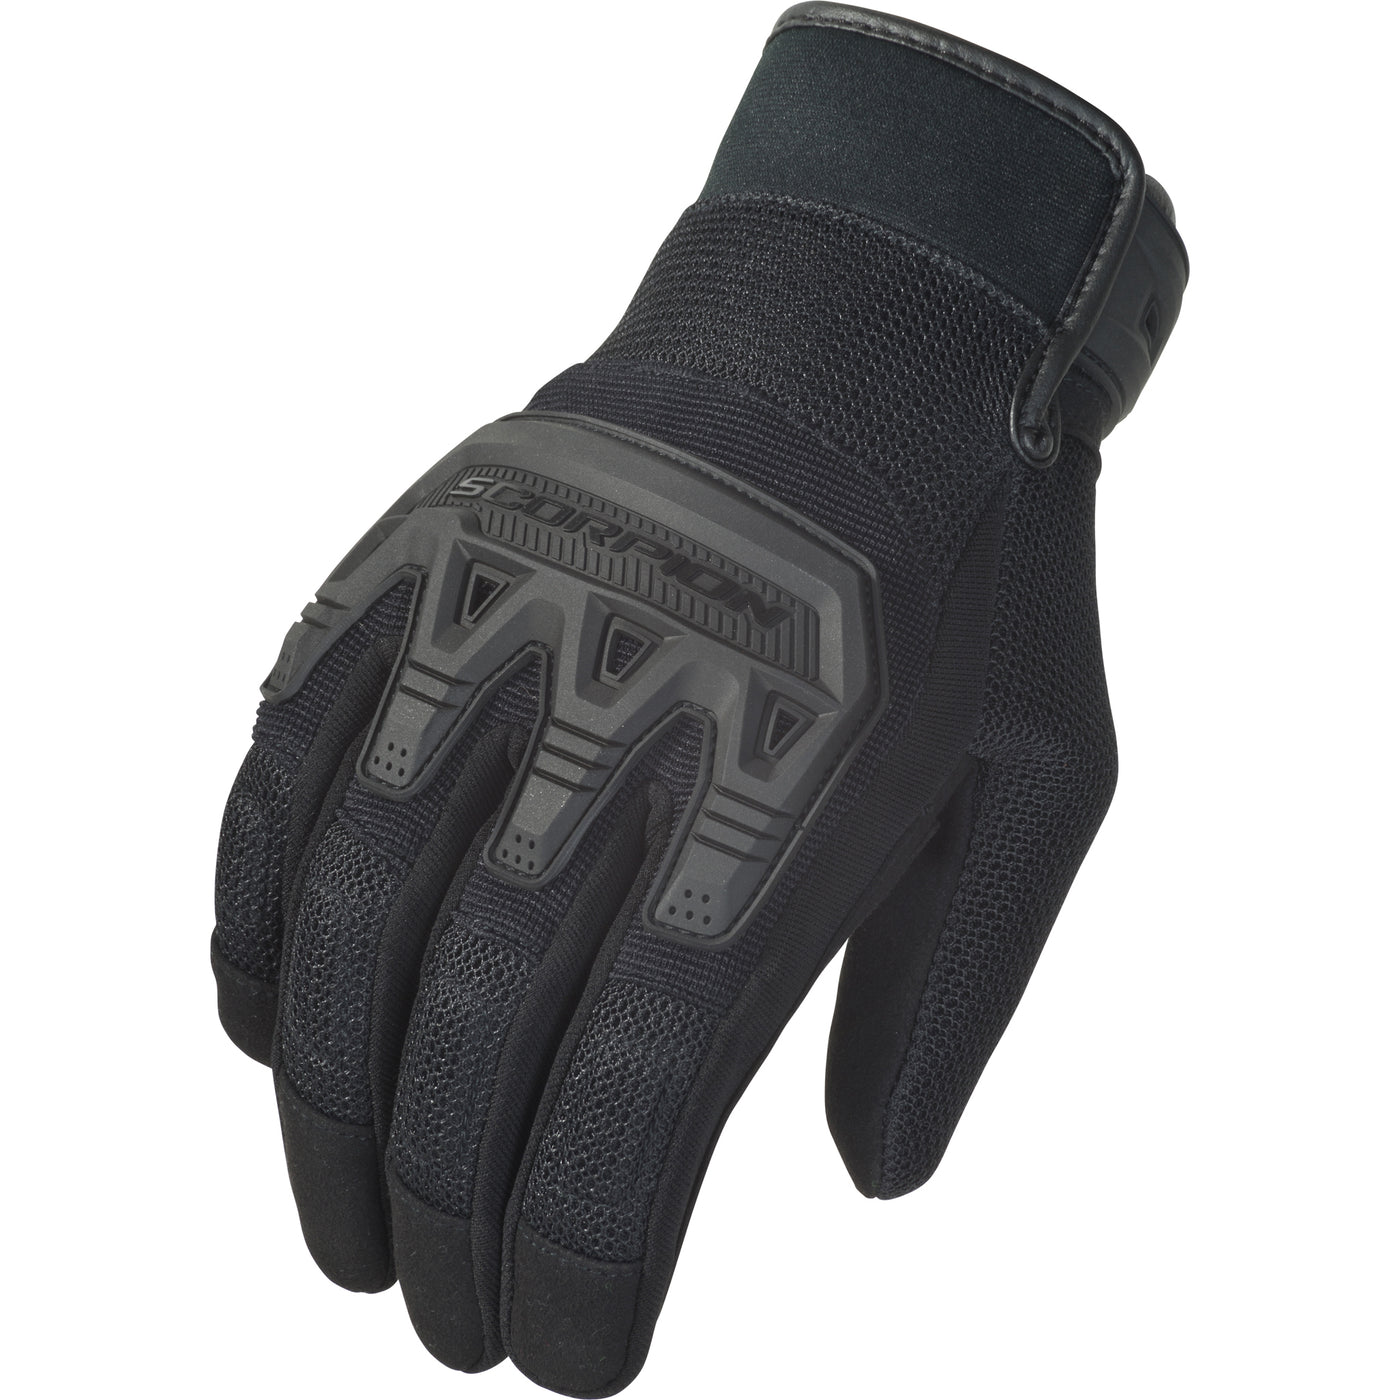 SCORPION EXO Covert Tactical Gloves